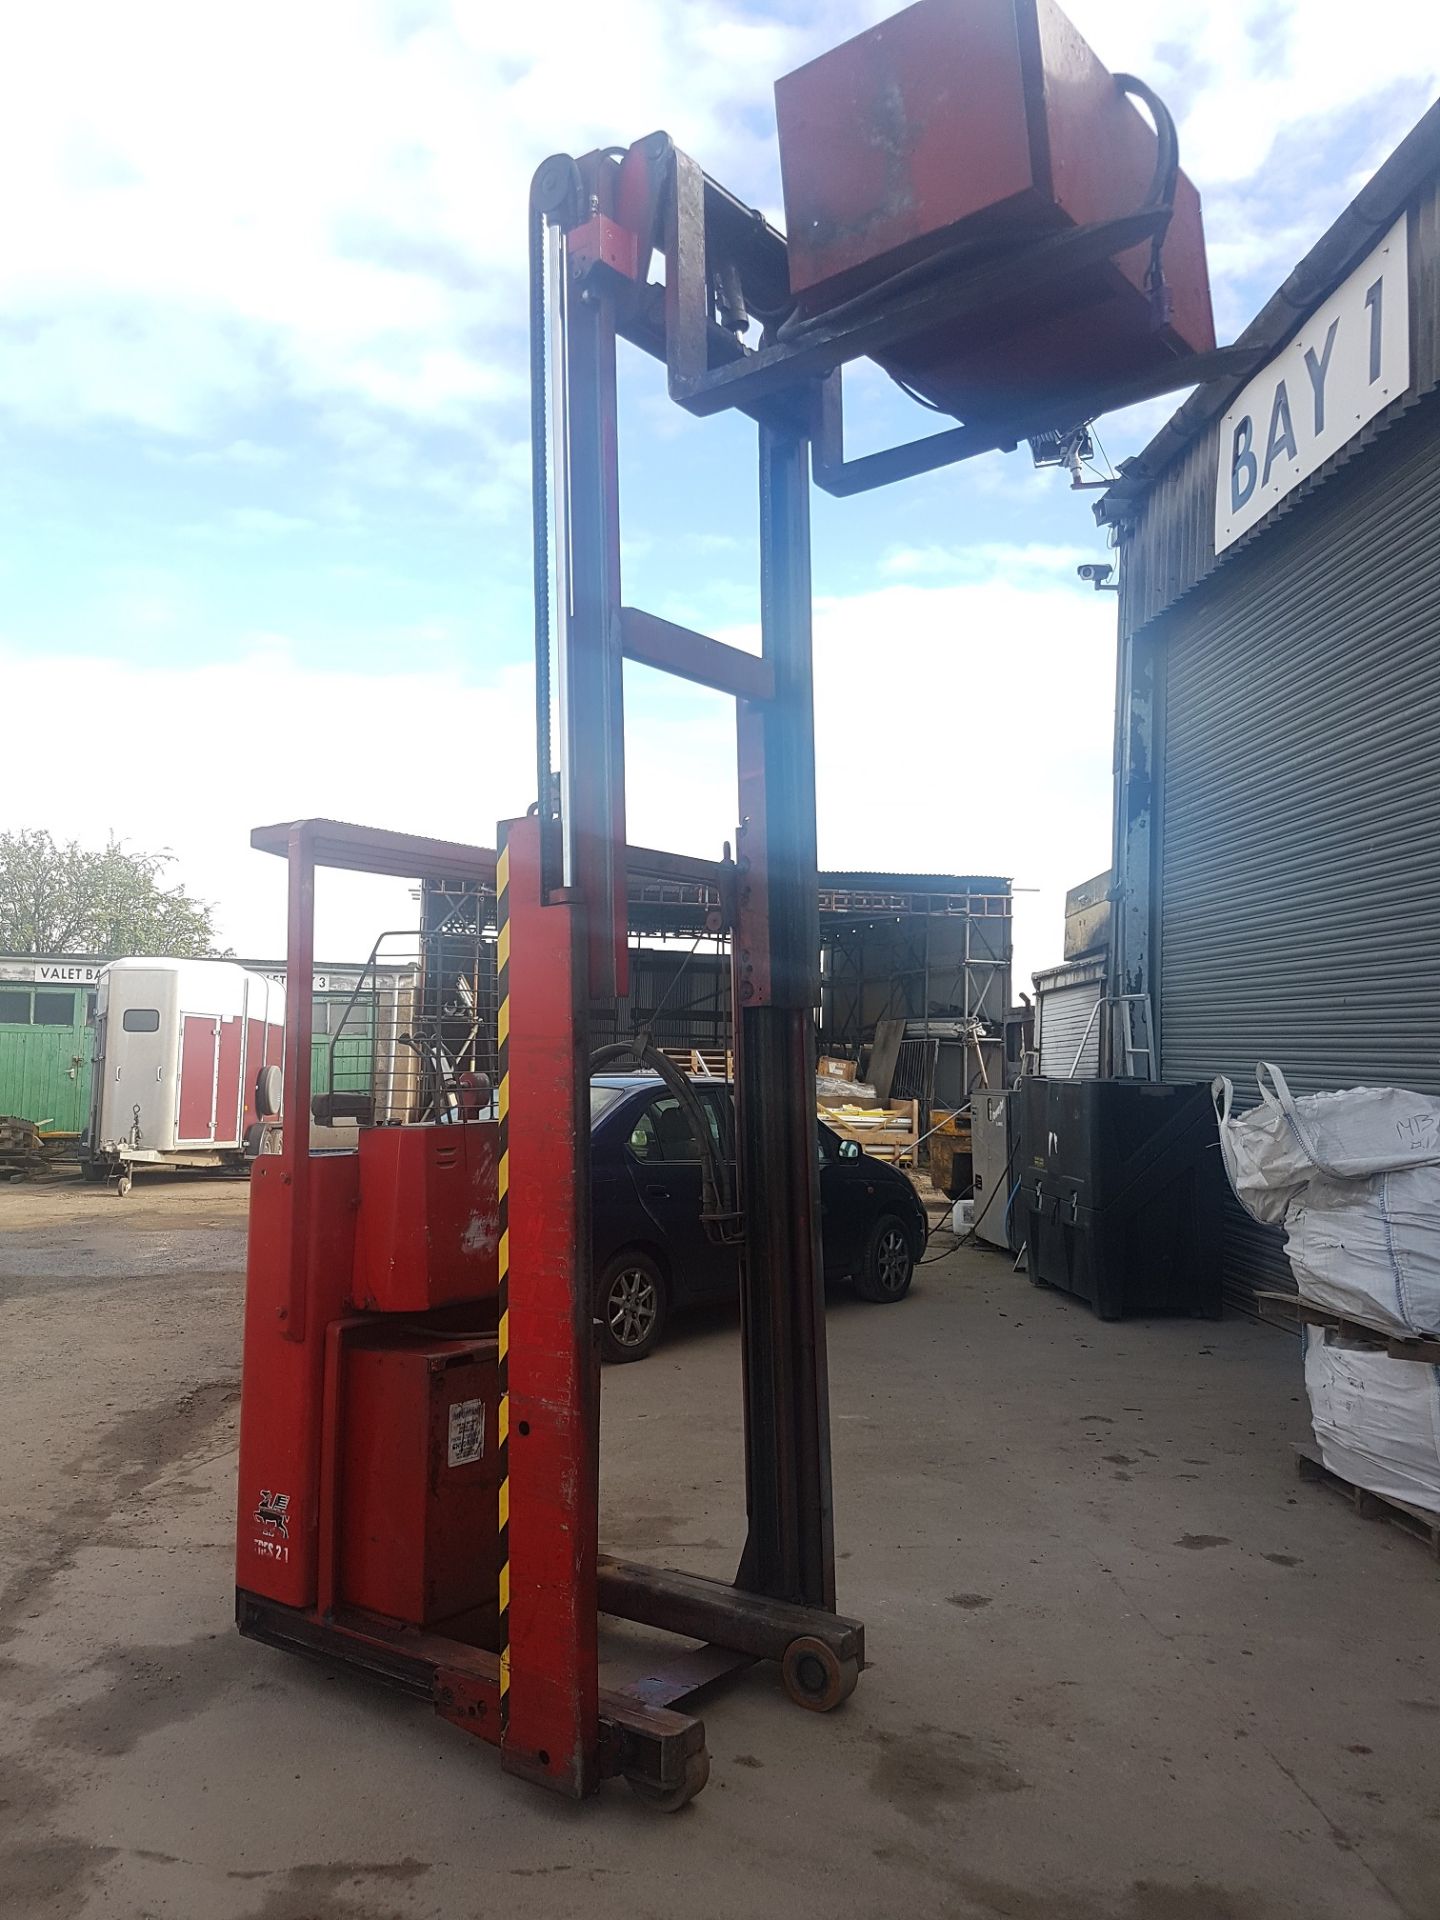 LANSING BAGNALL FRES 21 ELECTRIC FORKLIFT, GOOD BATTERY *PLUS VAT*   BATTERY CHARGER INCLUDED - Image 15 of 18